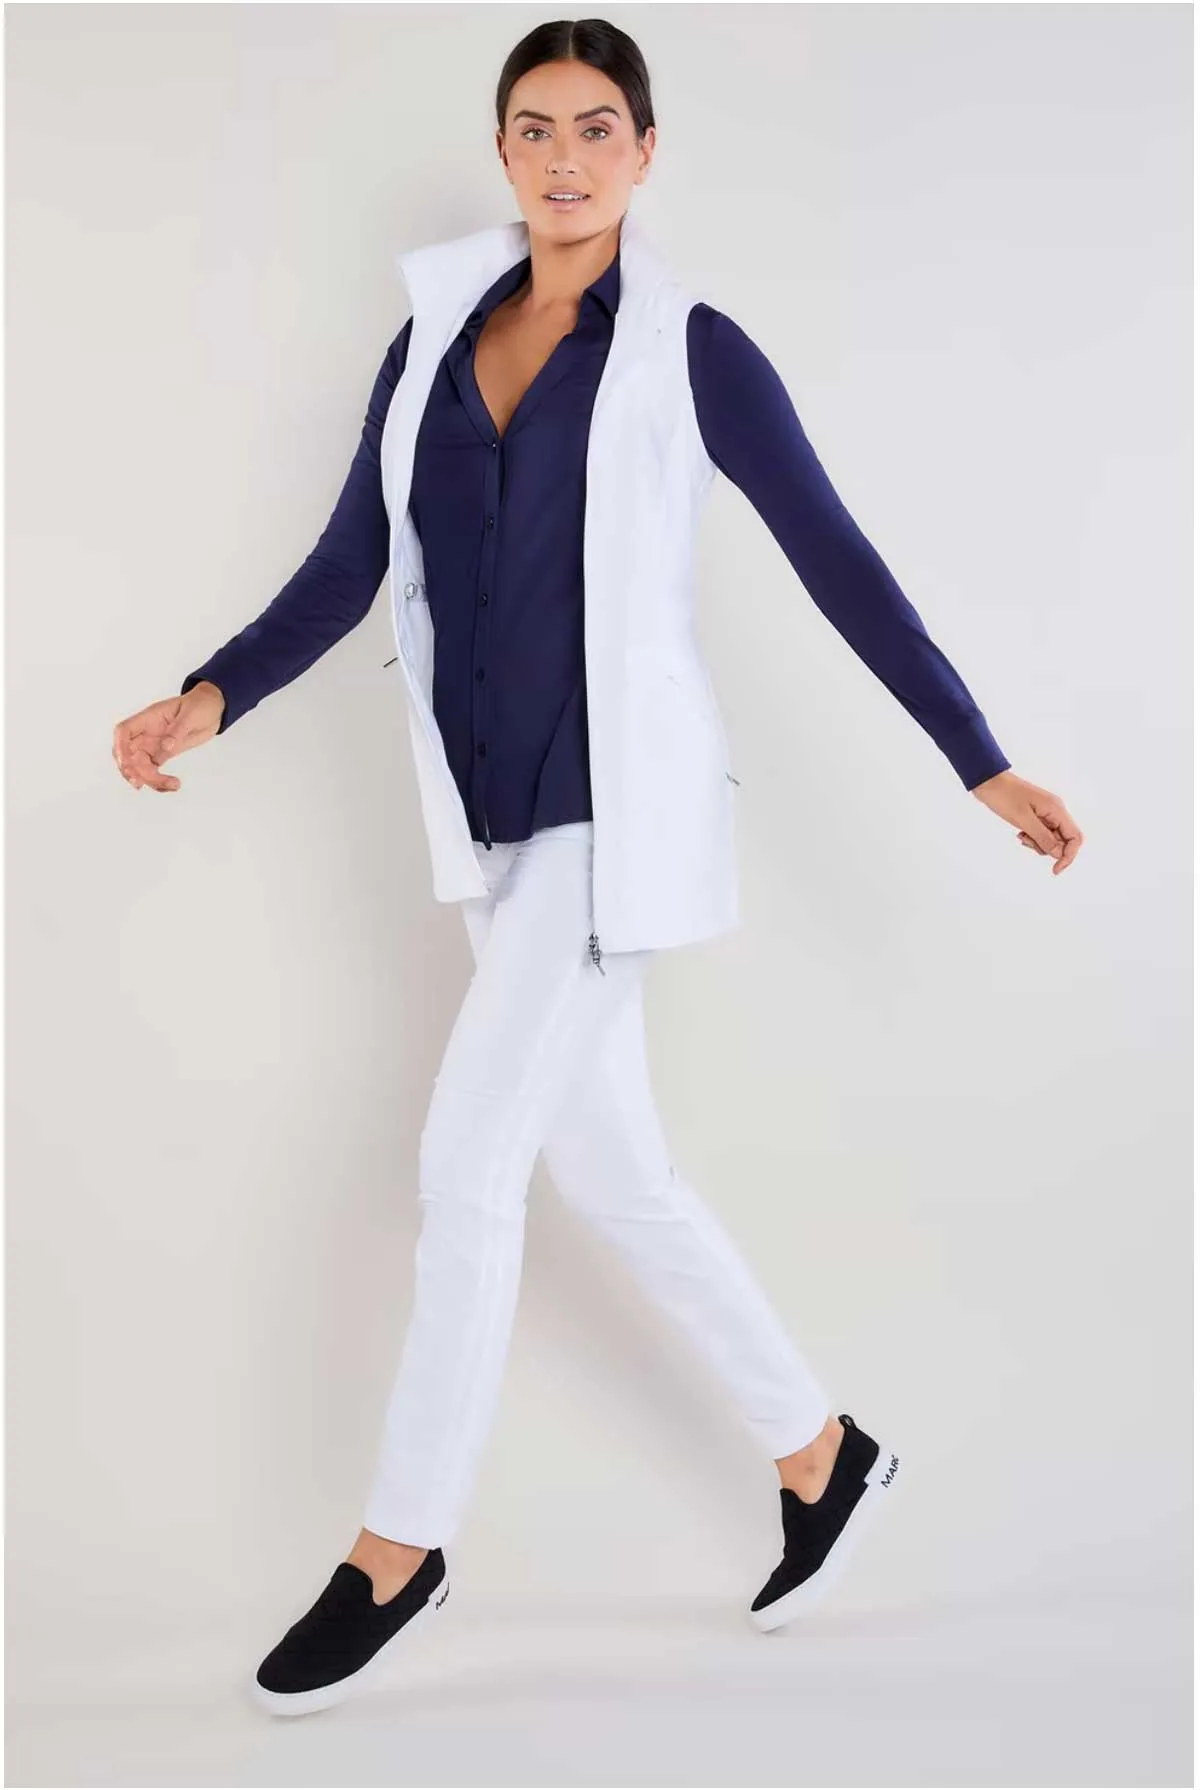 Lady modelling a pair of white travel pants with a blue shirt and whit vest jacket. 